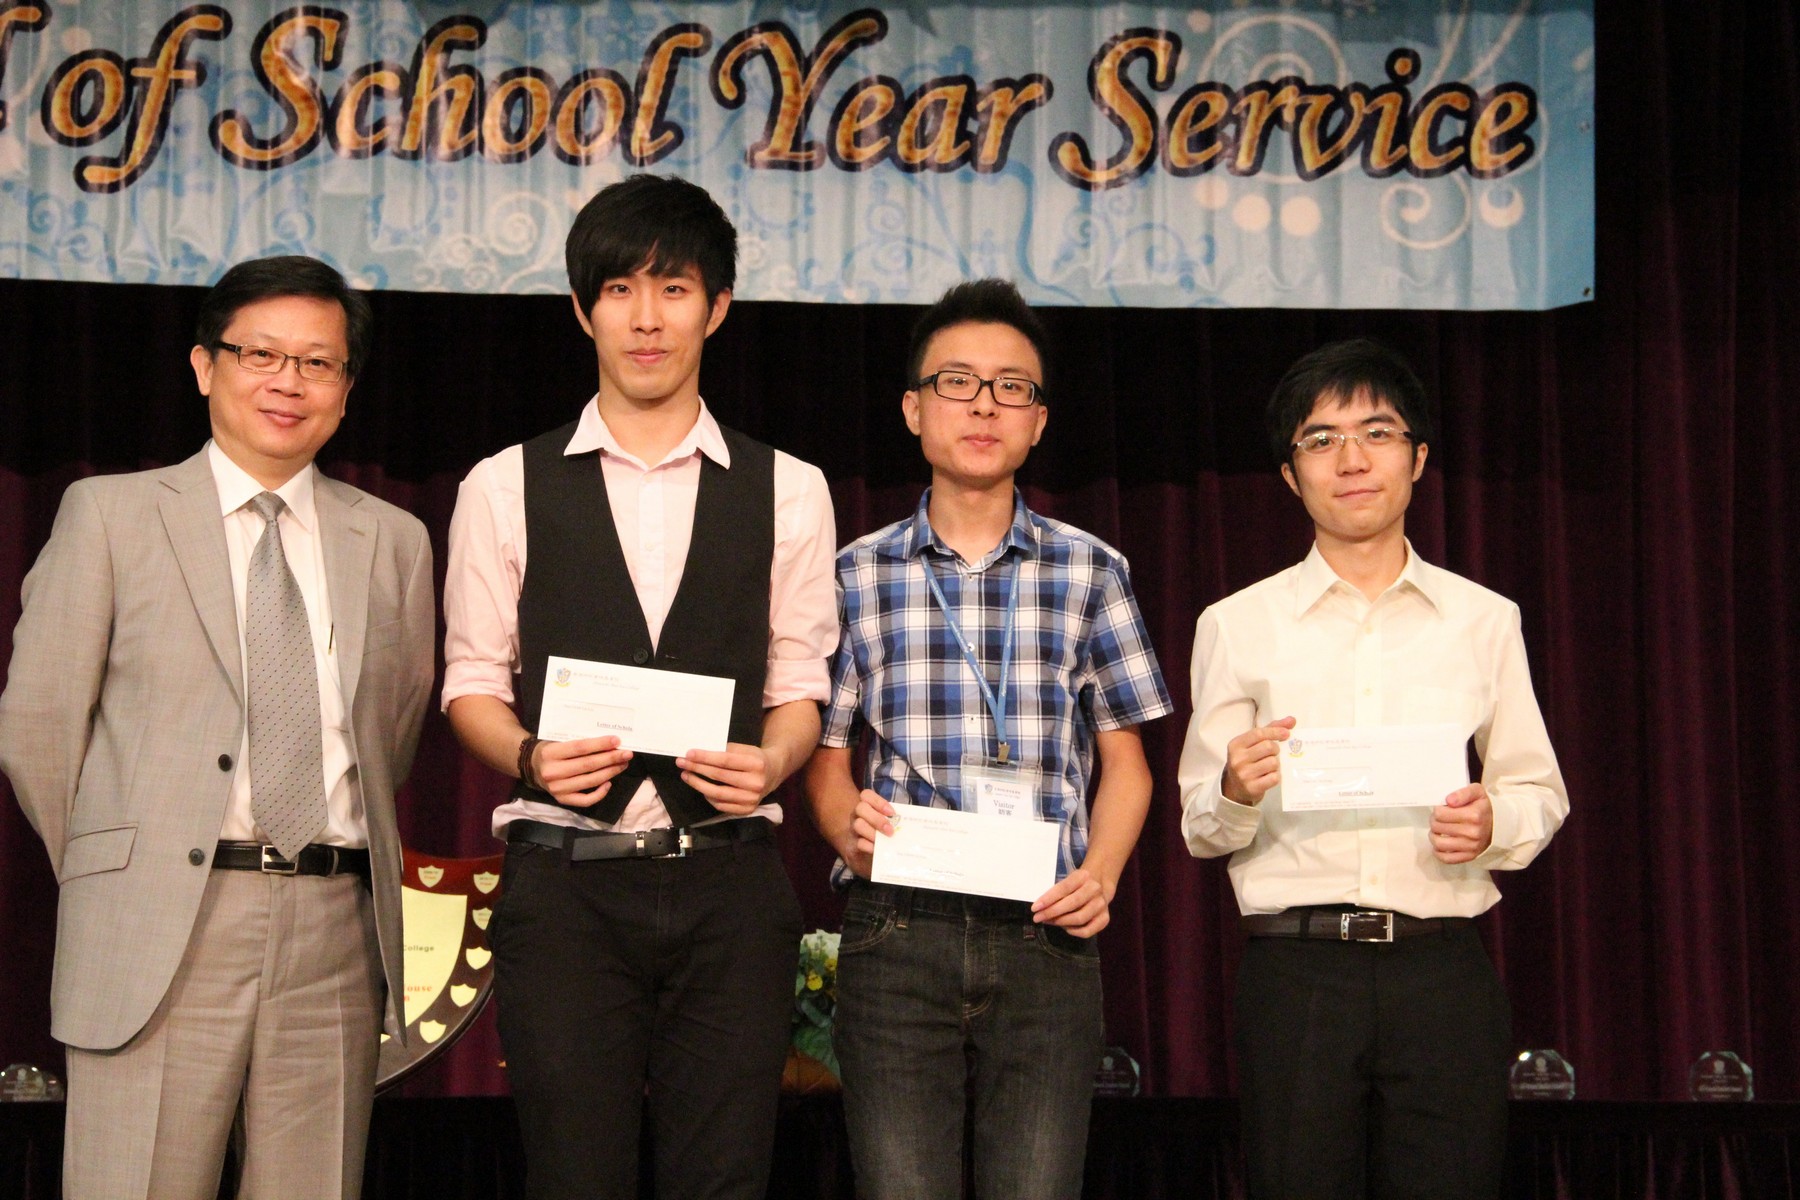 The End of School Year Service 2011-2012